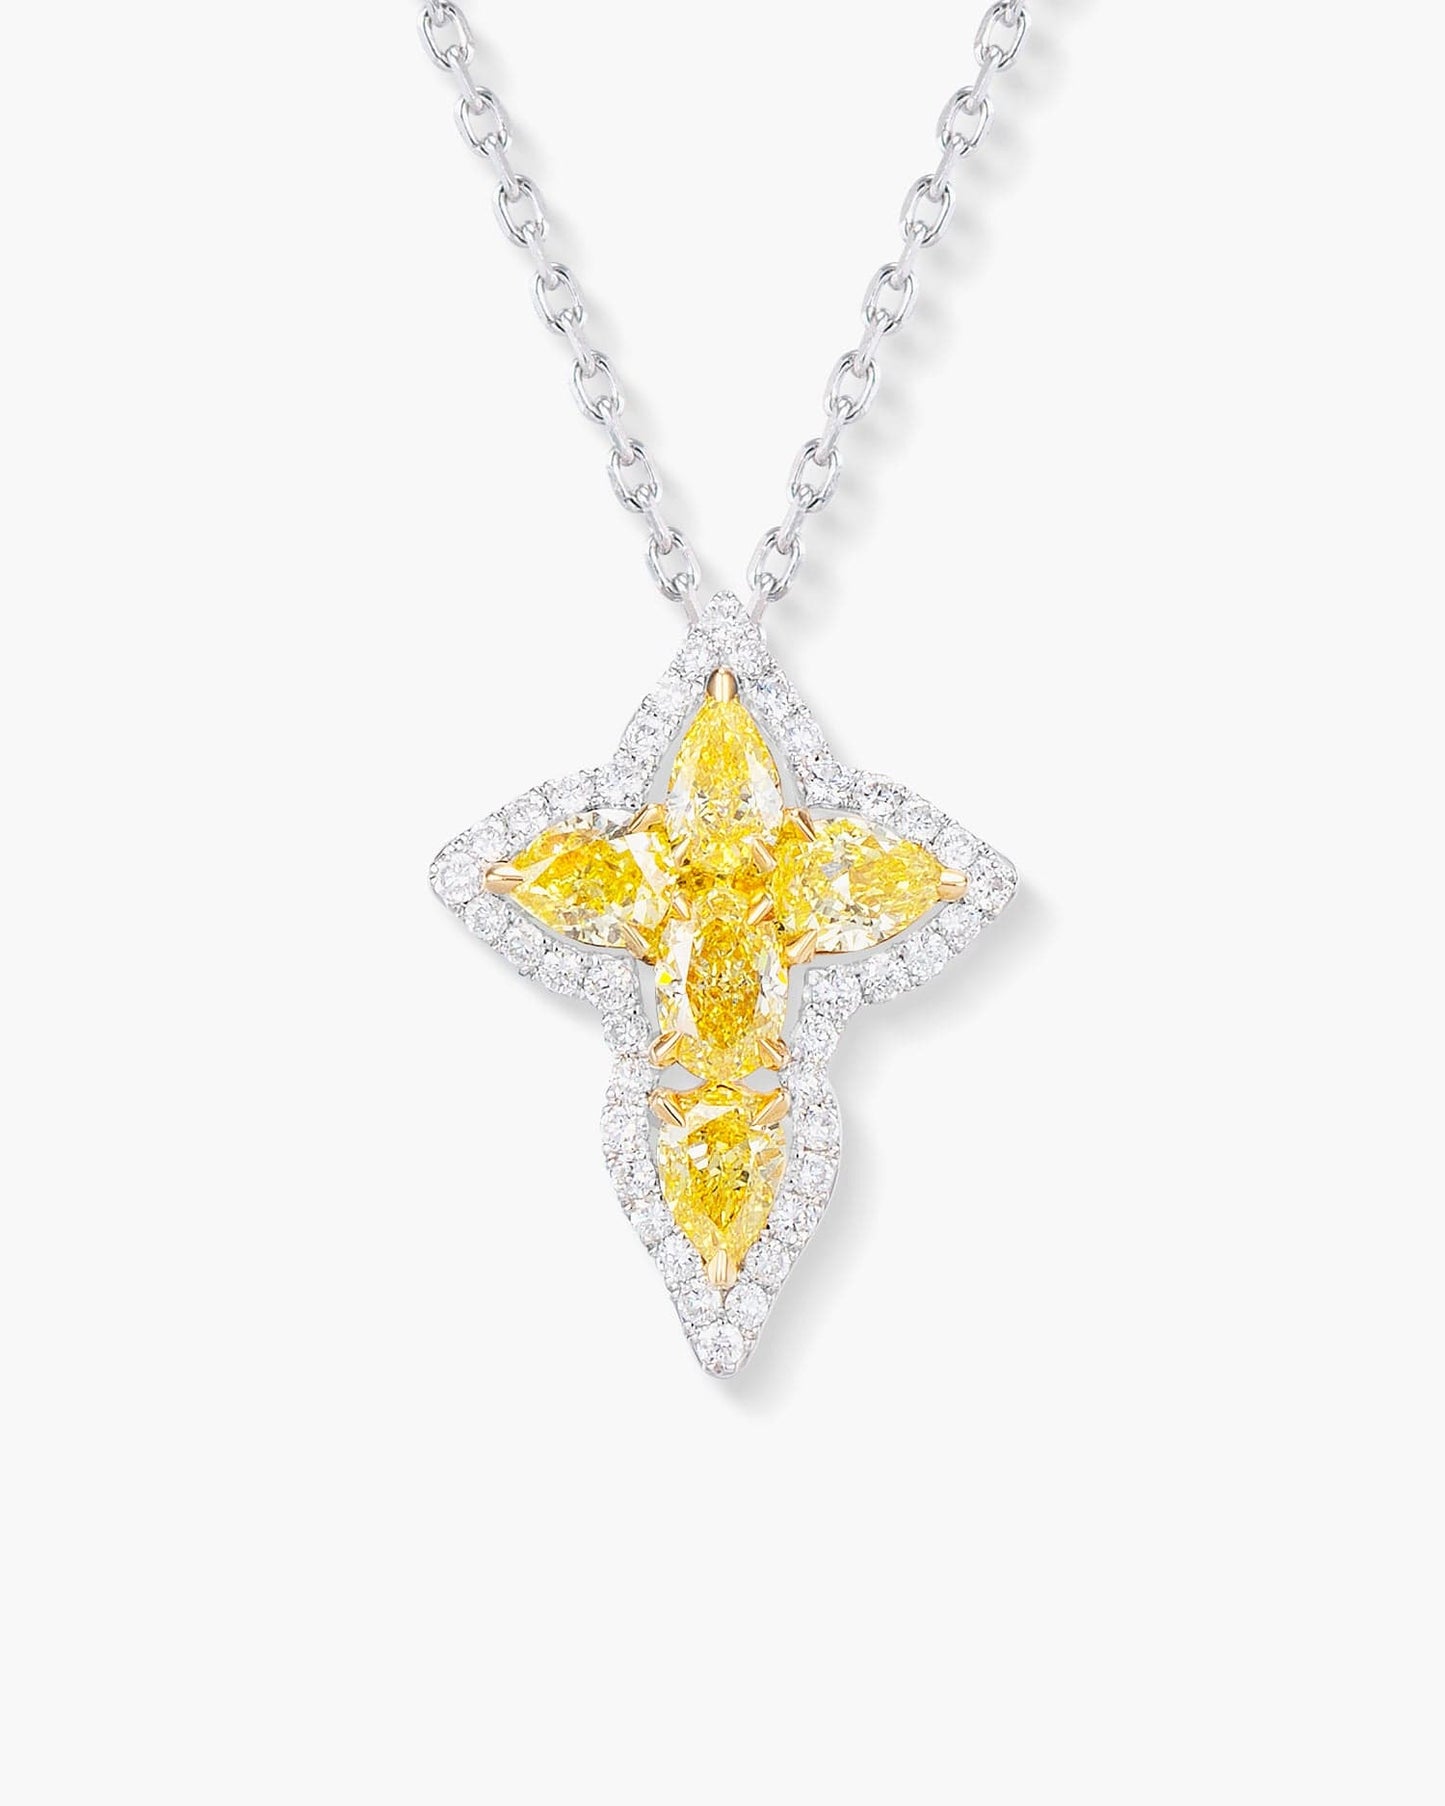 Fancy Shaped Yellow and White Diamond Cross Pendant Necklace, 1.05 carats